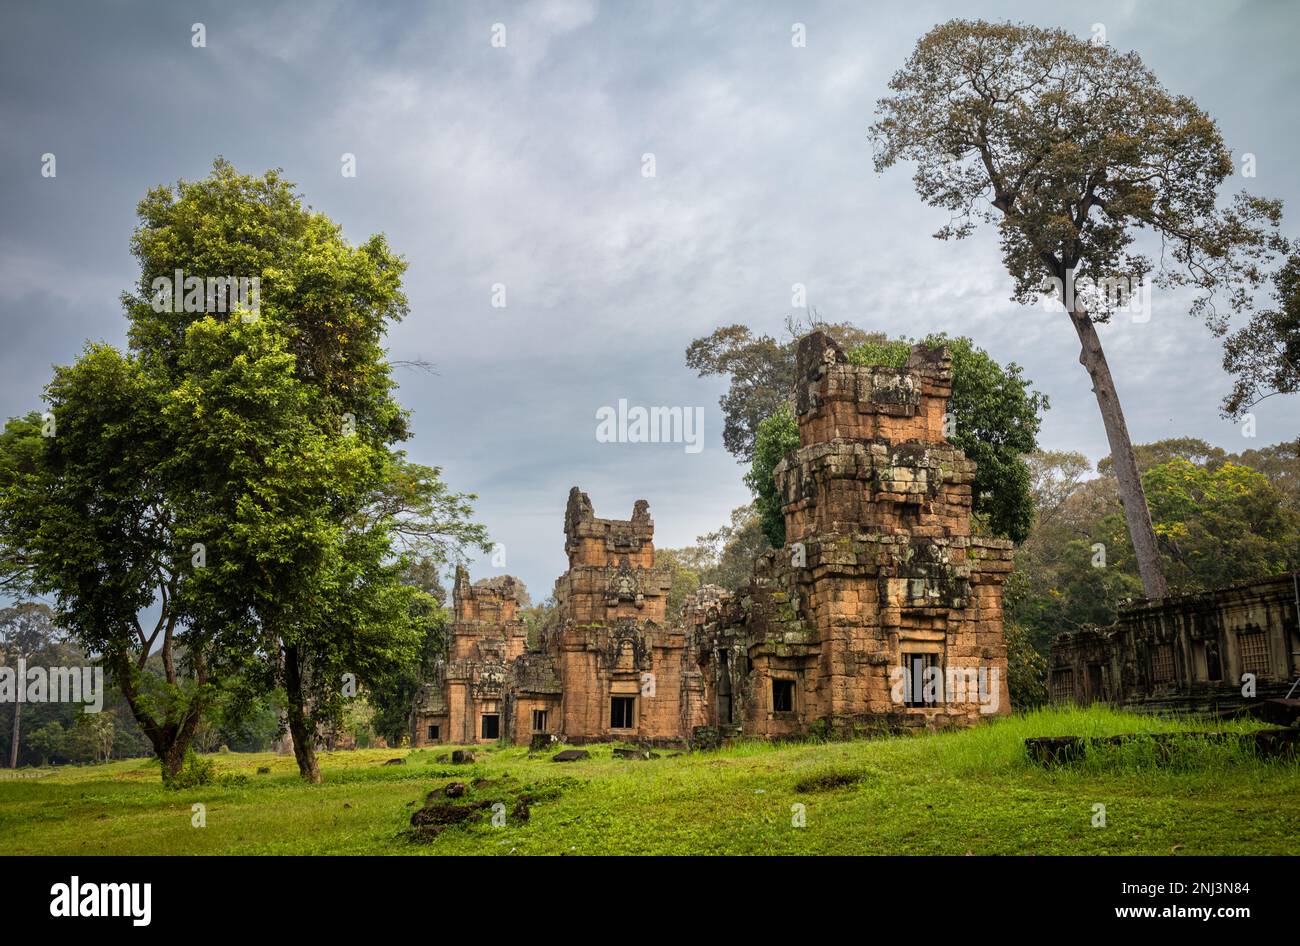 Some of the 12th century Prasat Suor Prat towers opposite the Elephant Terrace within Angkor Thom in Cambodia. Stock Photo